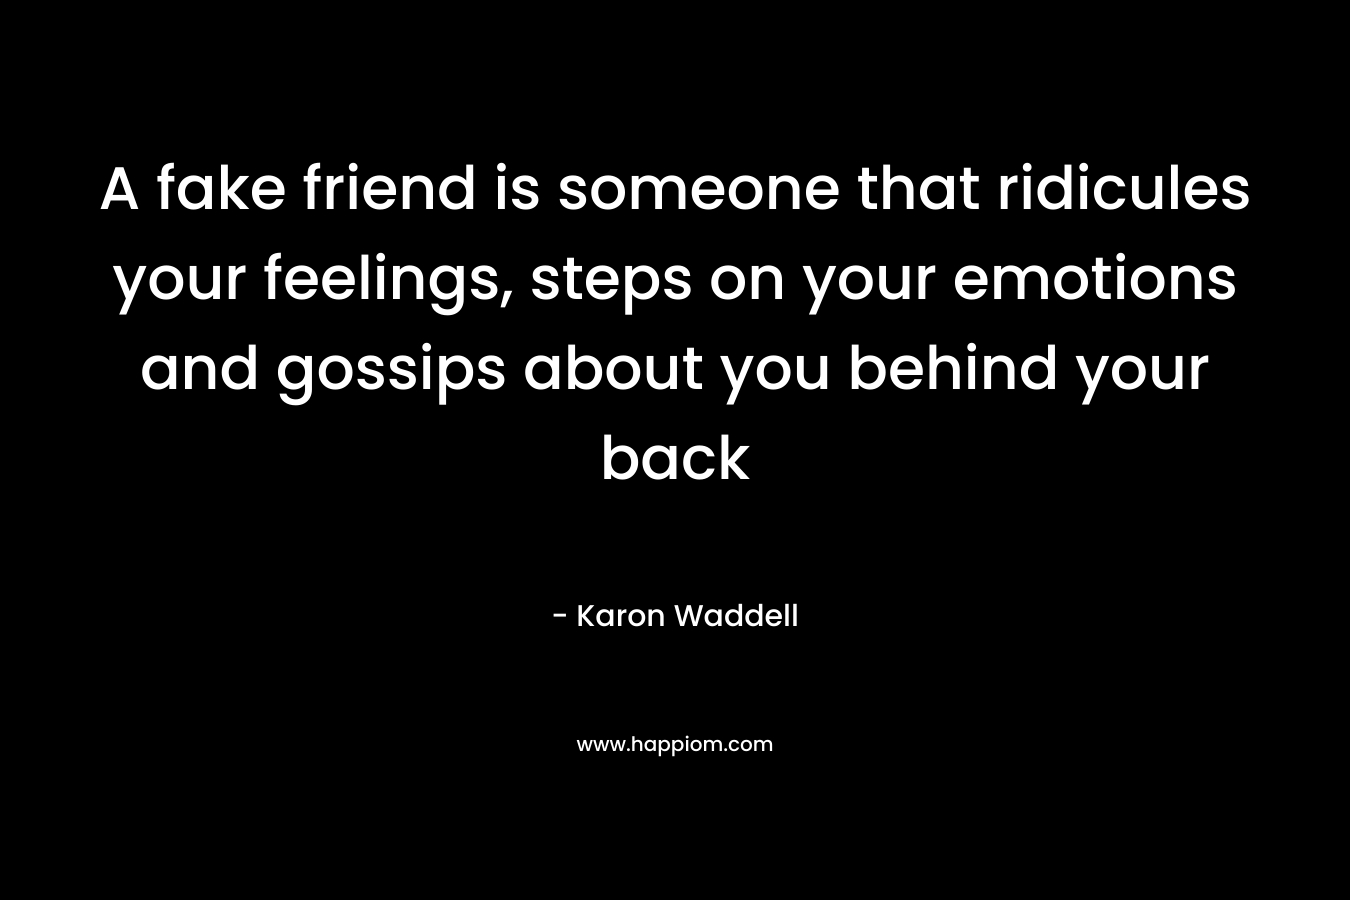 A fake friend is someone that ridicules your feelings, steps on your emotions and gossips about you behind your back